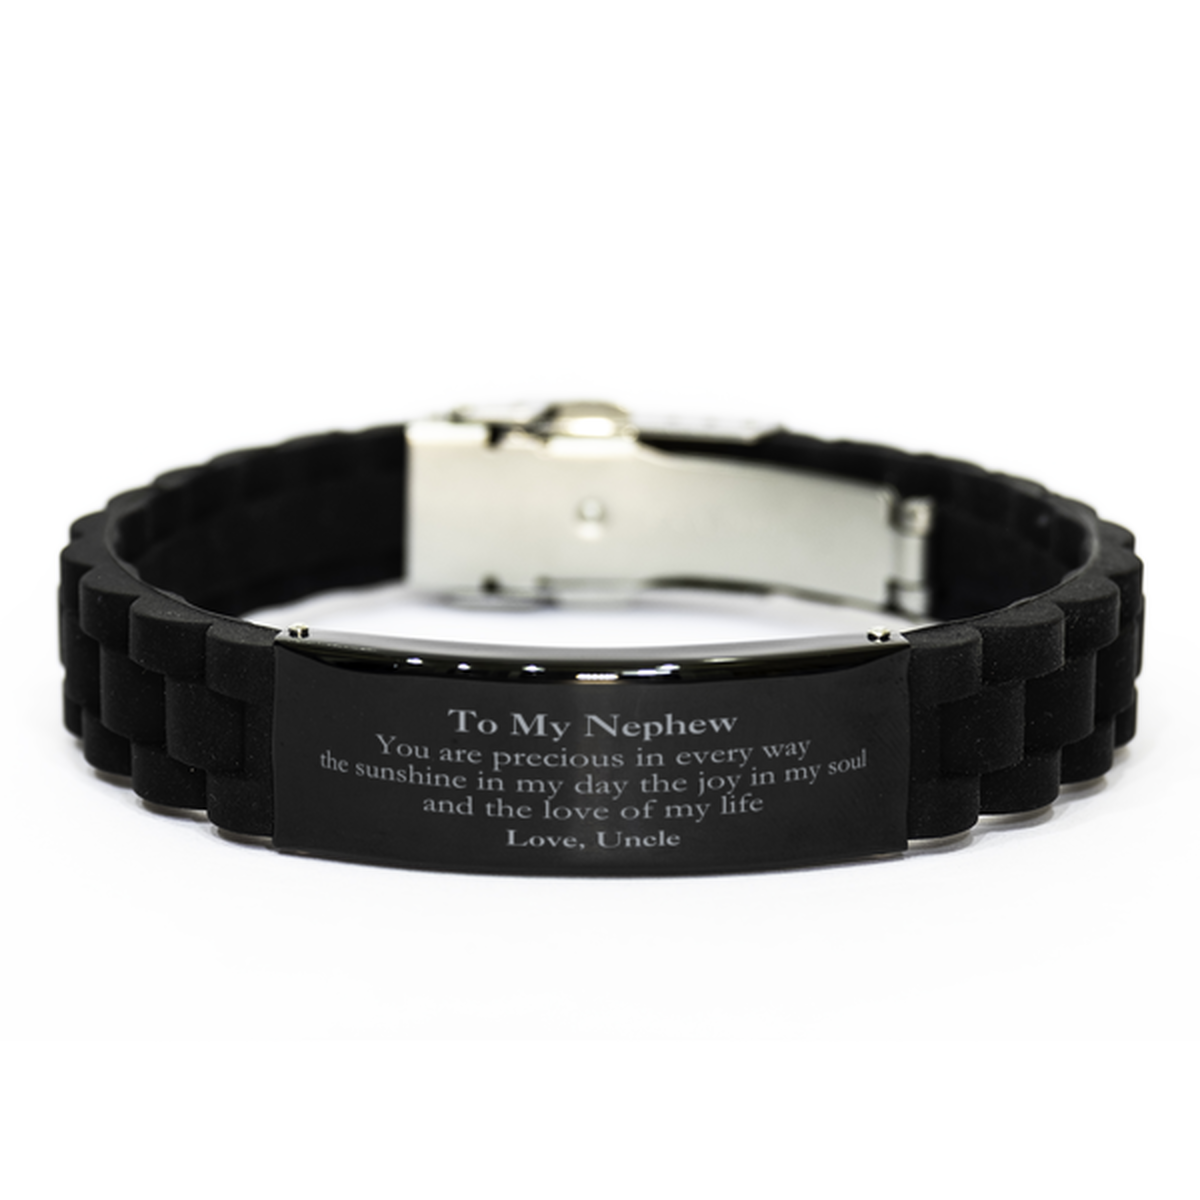 Graduation Gifts for Nephew Black Glidelock Clasp Bracelet Present from Uncle, Christmas Nephew Birthday Gifts Nephew You are precious in every way the sunshine in my day. Love, Uncle